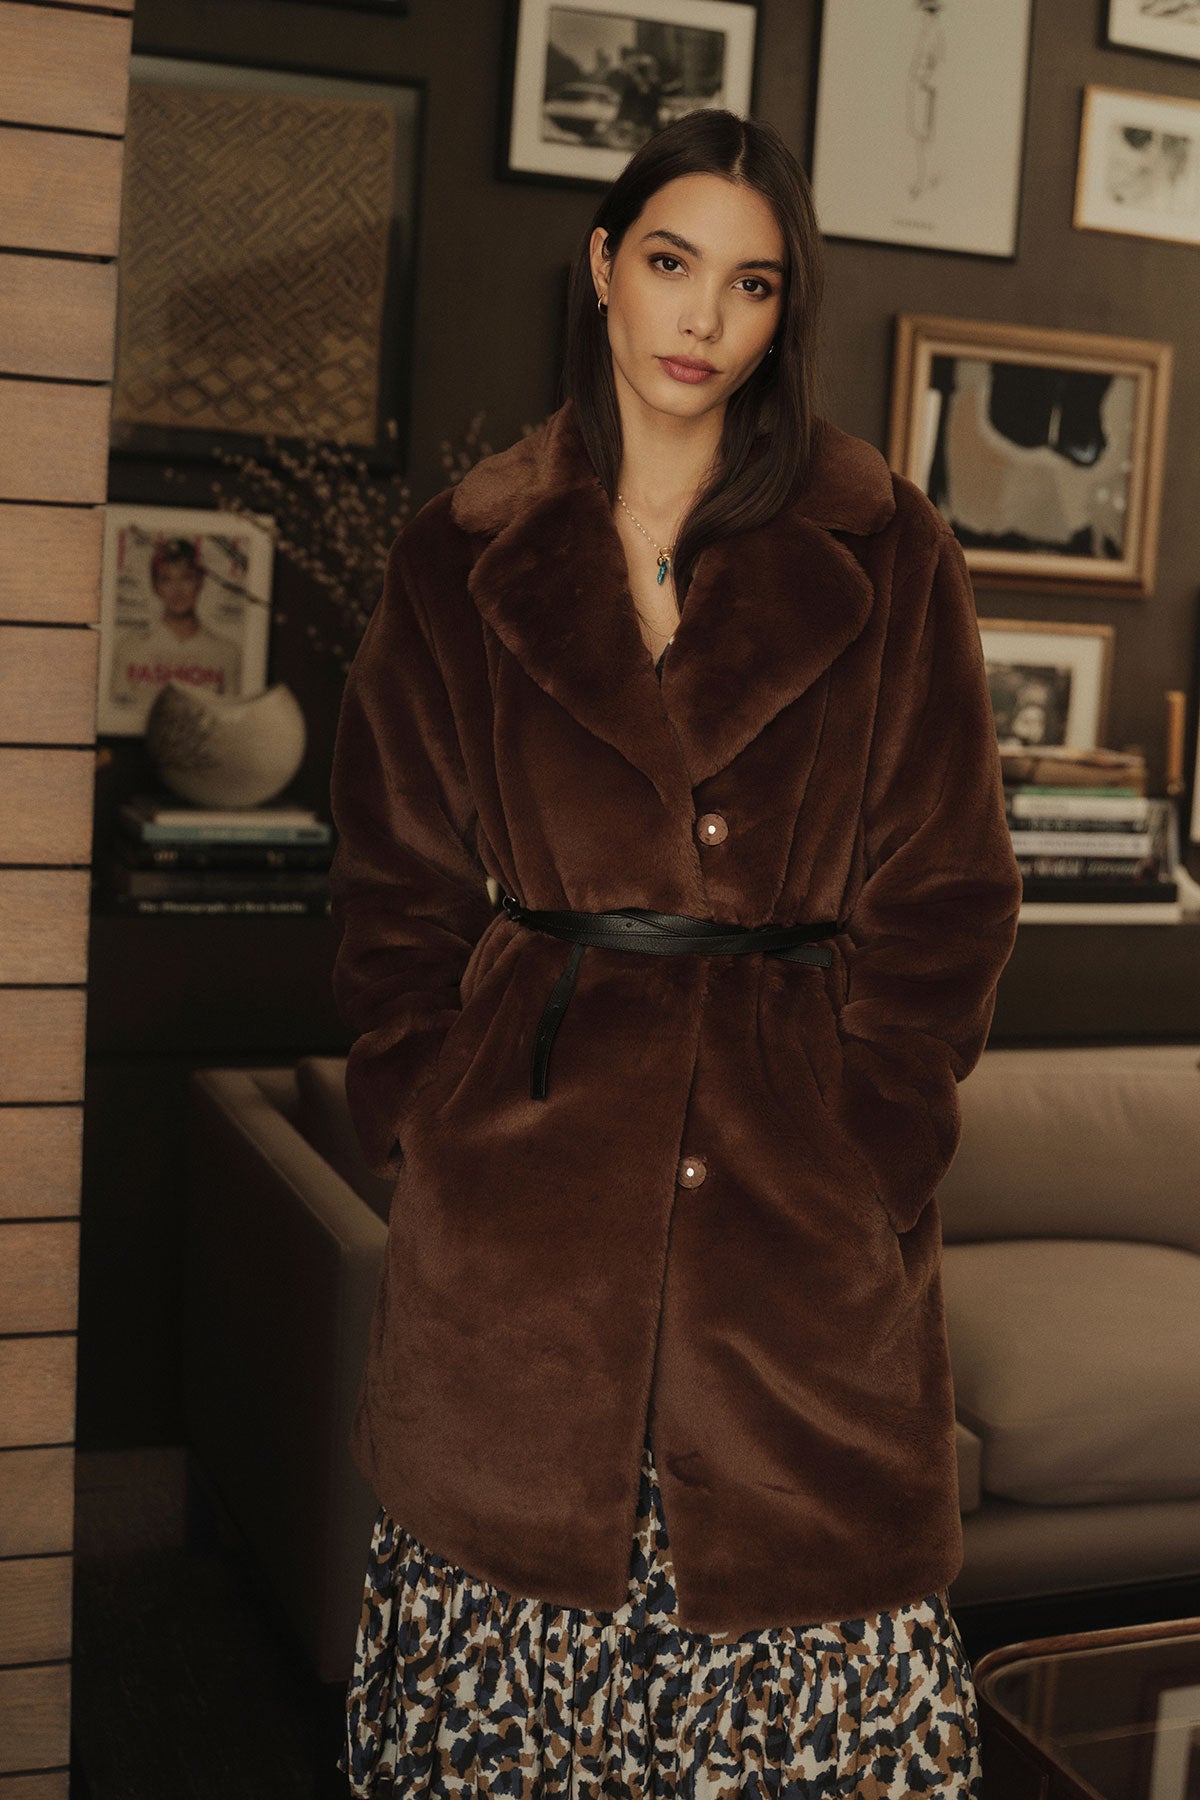 A woman in a brown fur coat with elastic cuffs standing in a living room was wearing the "OTTILIE PRINTED BOHO DRESS" by Velvet by Graham & Spencer.-35445657043137